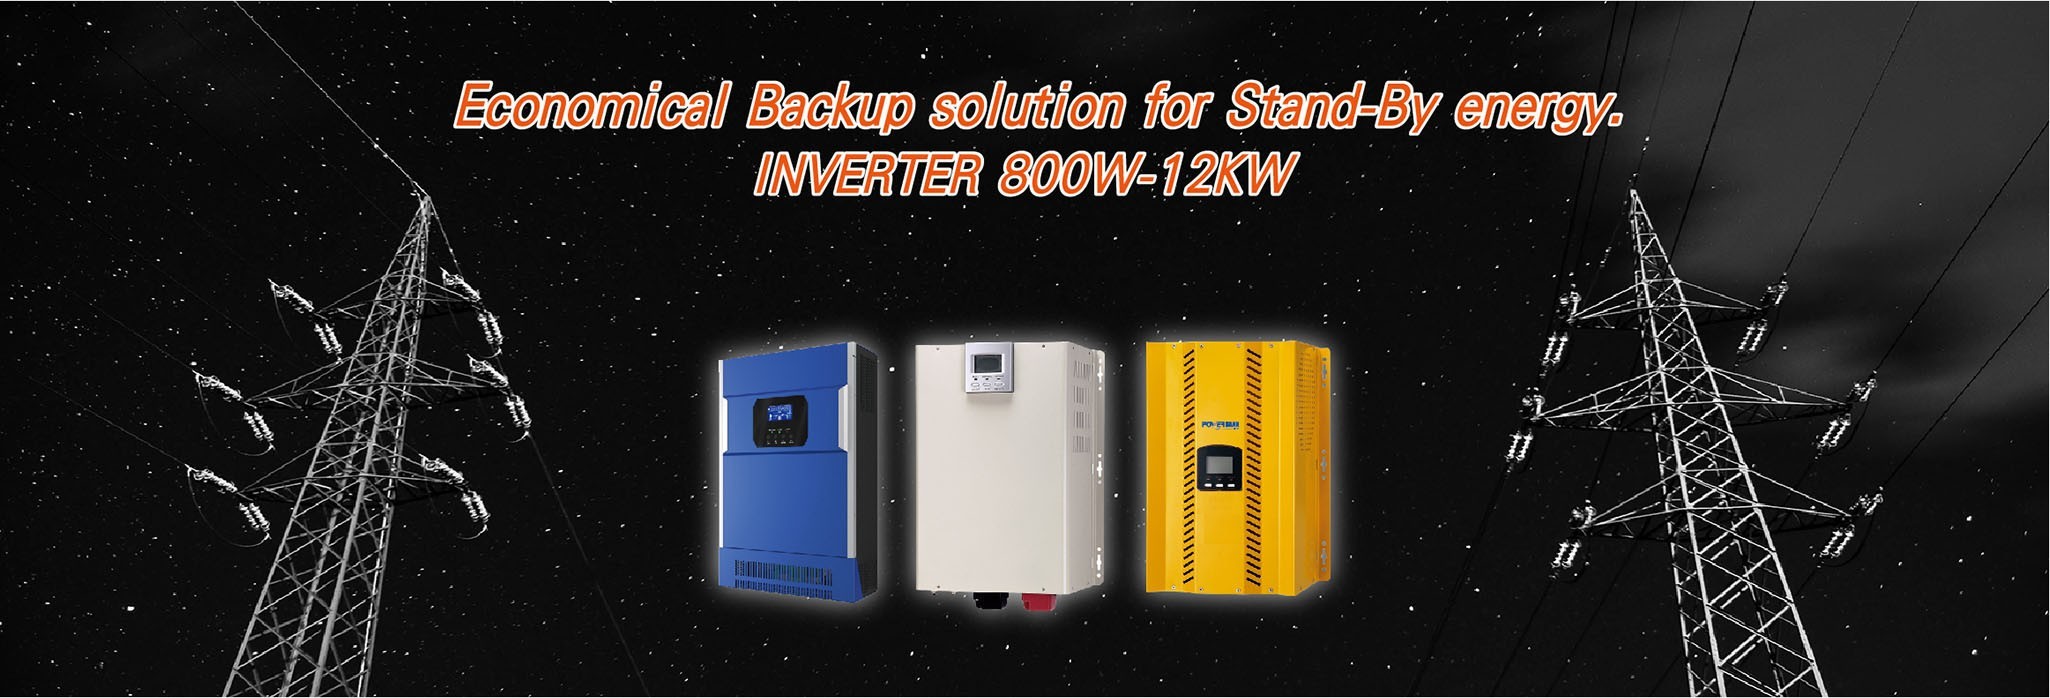 Economical Backup solution for Stand-By energy